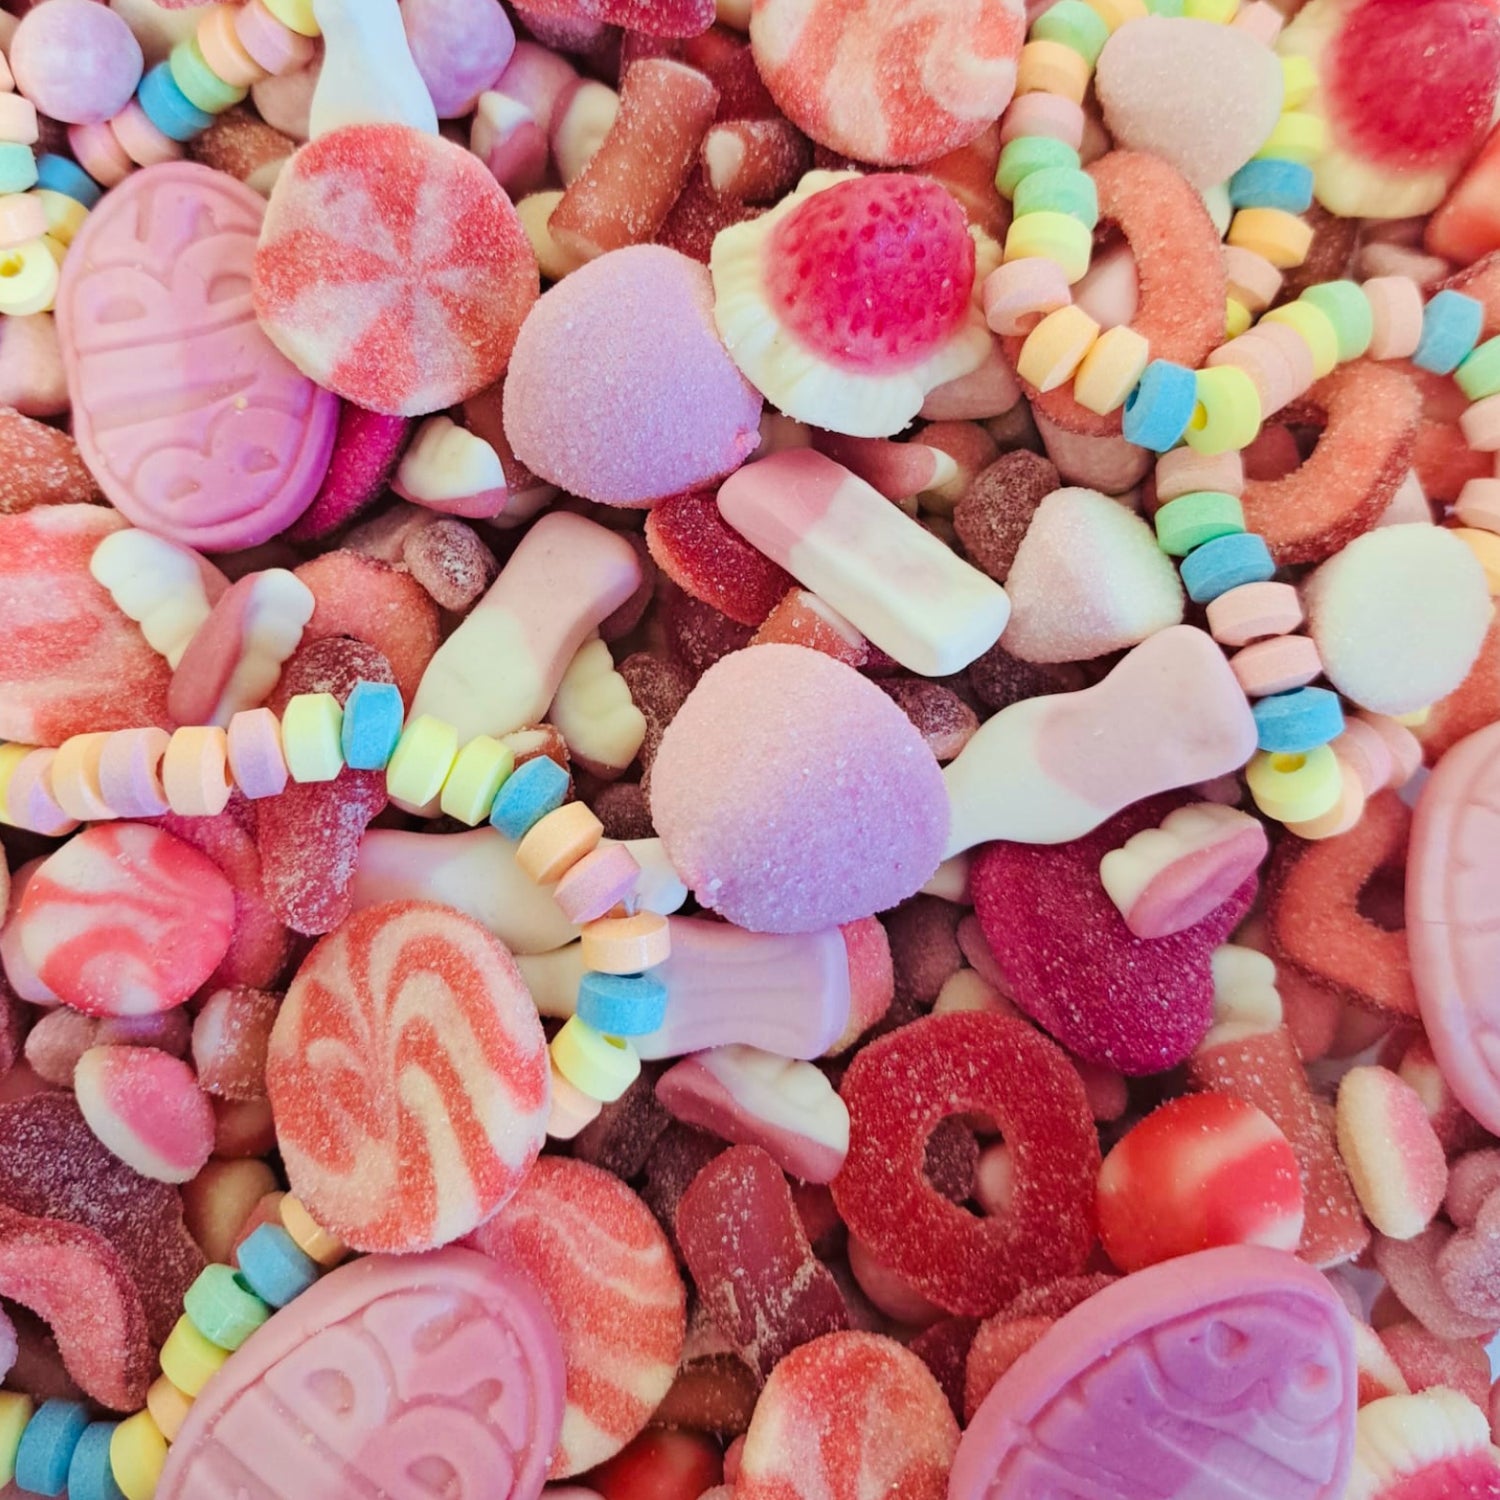 Pink Pick n Mix Sweets